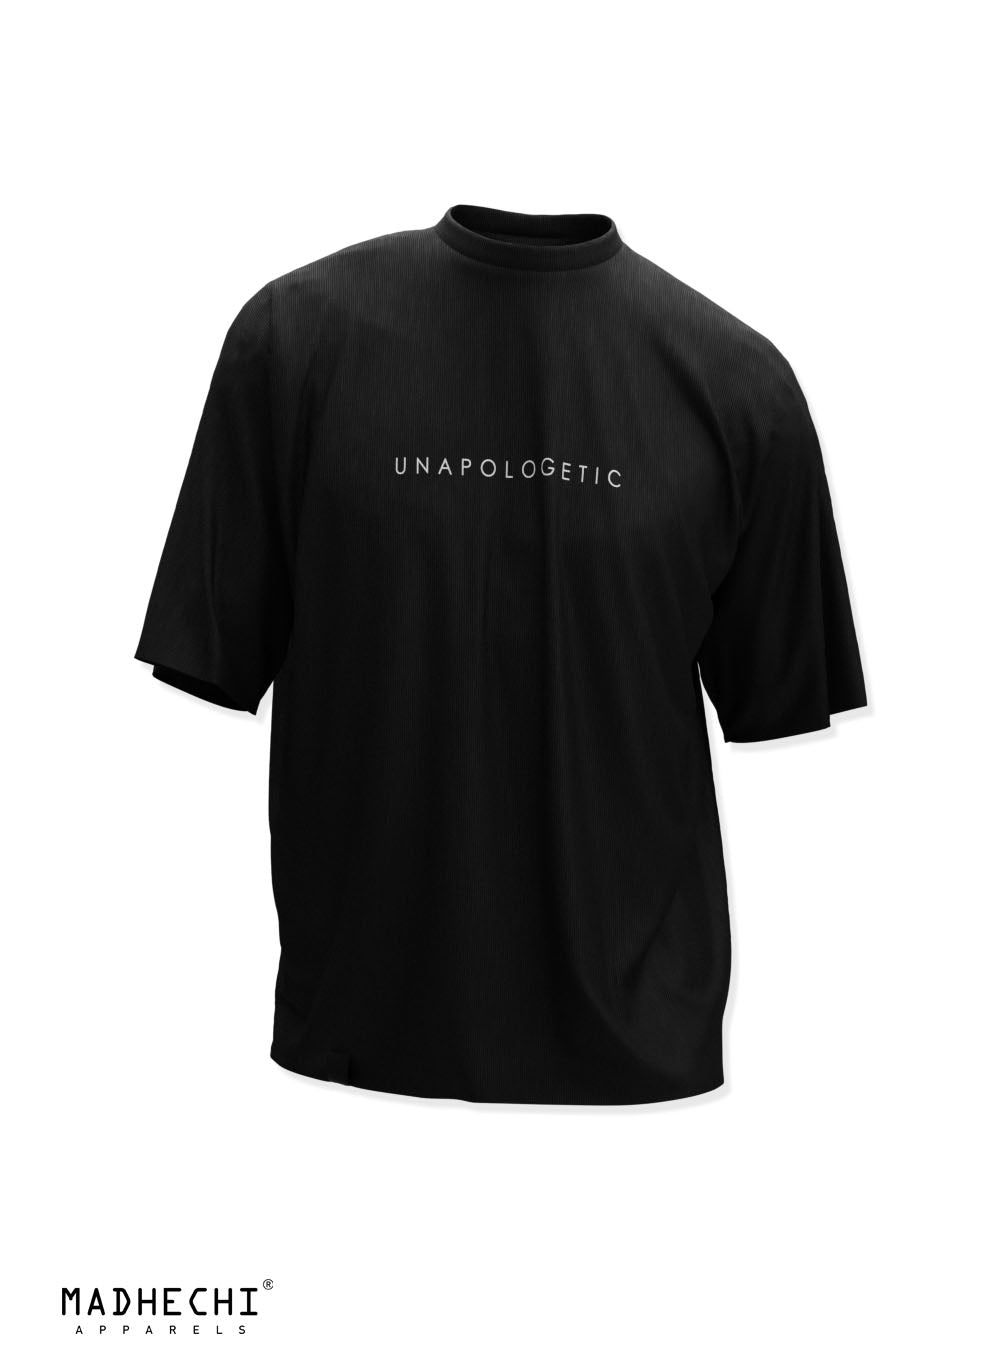 Unapologetic Oversized Black T-Shirt